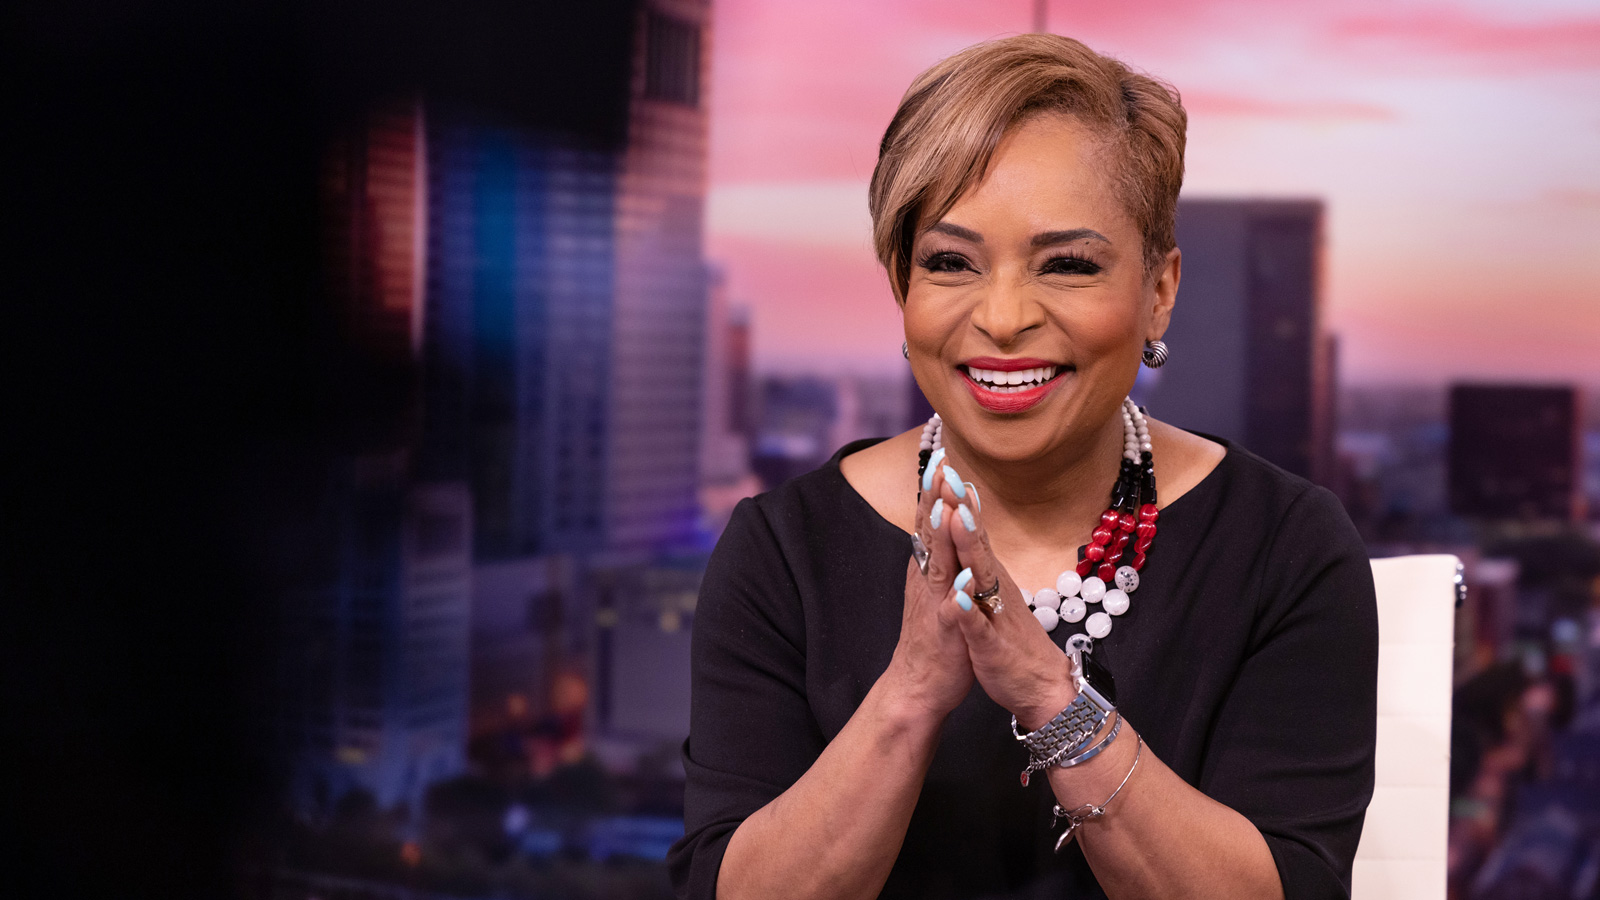 Tracy Townsend, an attractive woman with symmetrical features and bright lipstick, grins as she looks at a camera during the newscast. The background is a picture of a sunrise over Columbus. She touches her hands together in front of her; her long nails are painted baby blue. On the desk in front of her sits a tablet computer.